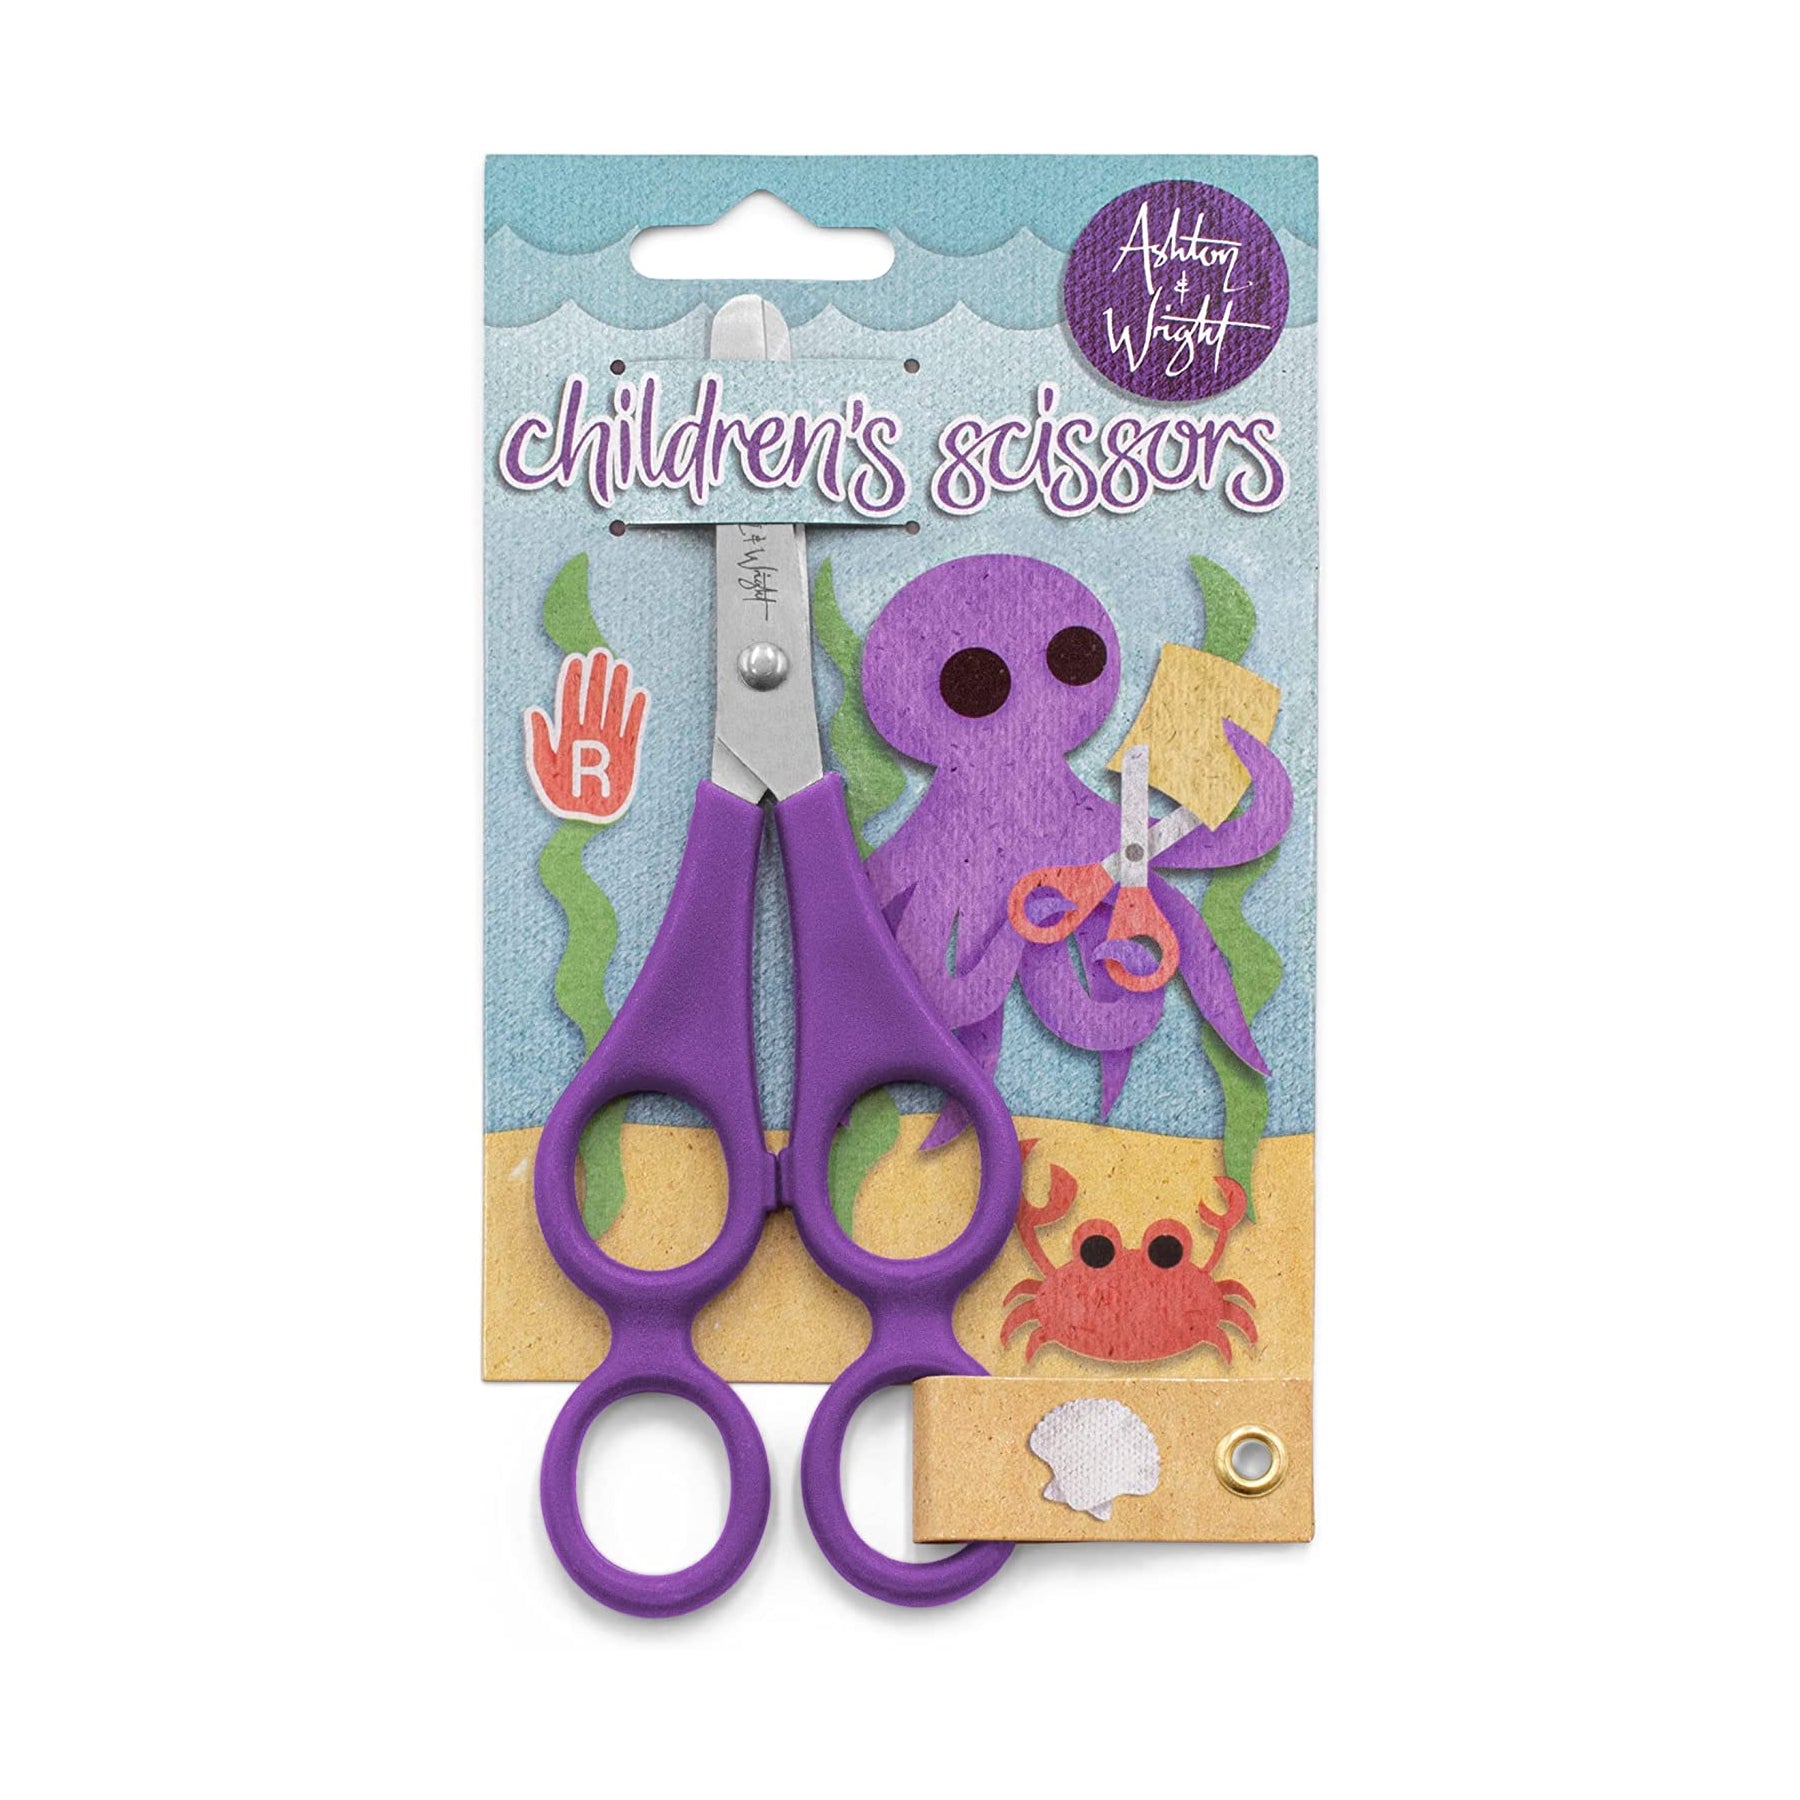 They're childrens' training scissors. Like for pre-schoolers. The extra  holes are so a grown-up can co-scissor and help the kid. :  r/specializedtools